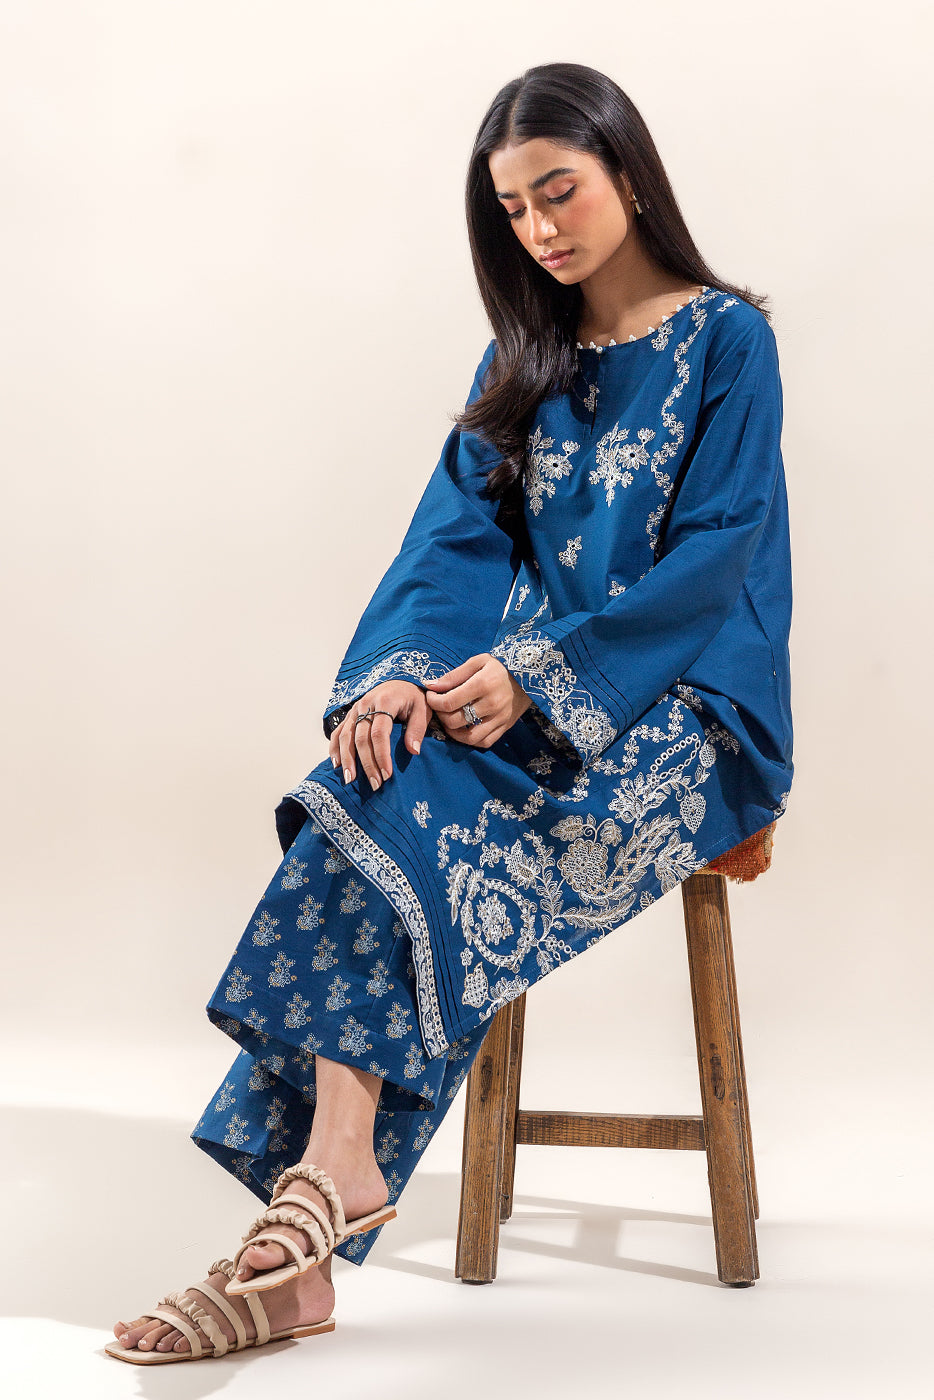 2 PIECE EMBROIDERED LAWN SUIT-MOONLIT OCEAN (UNSTITCHED) - BEECHTREE